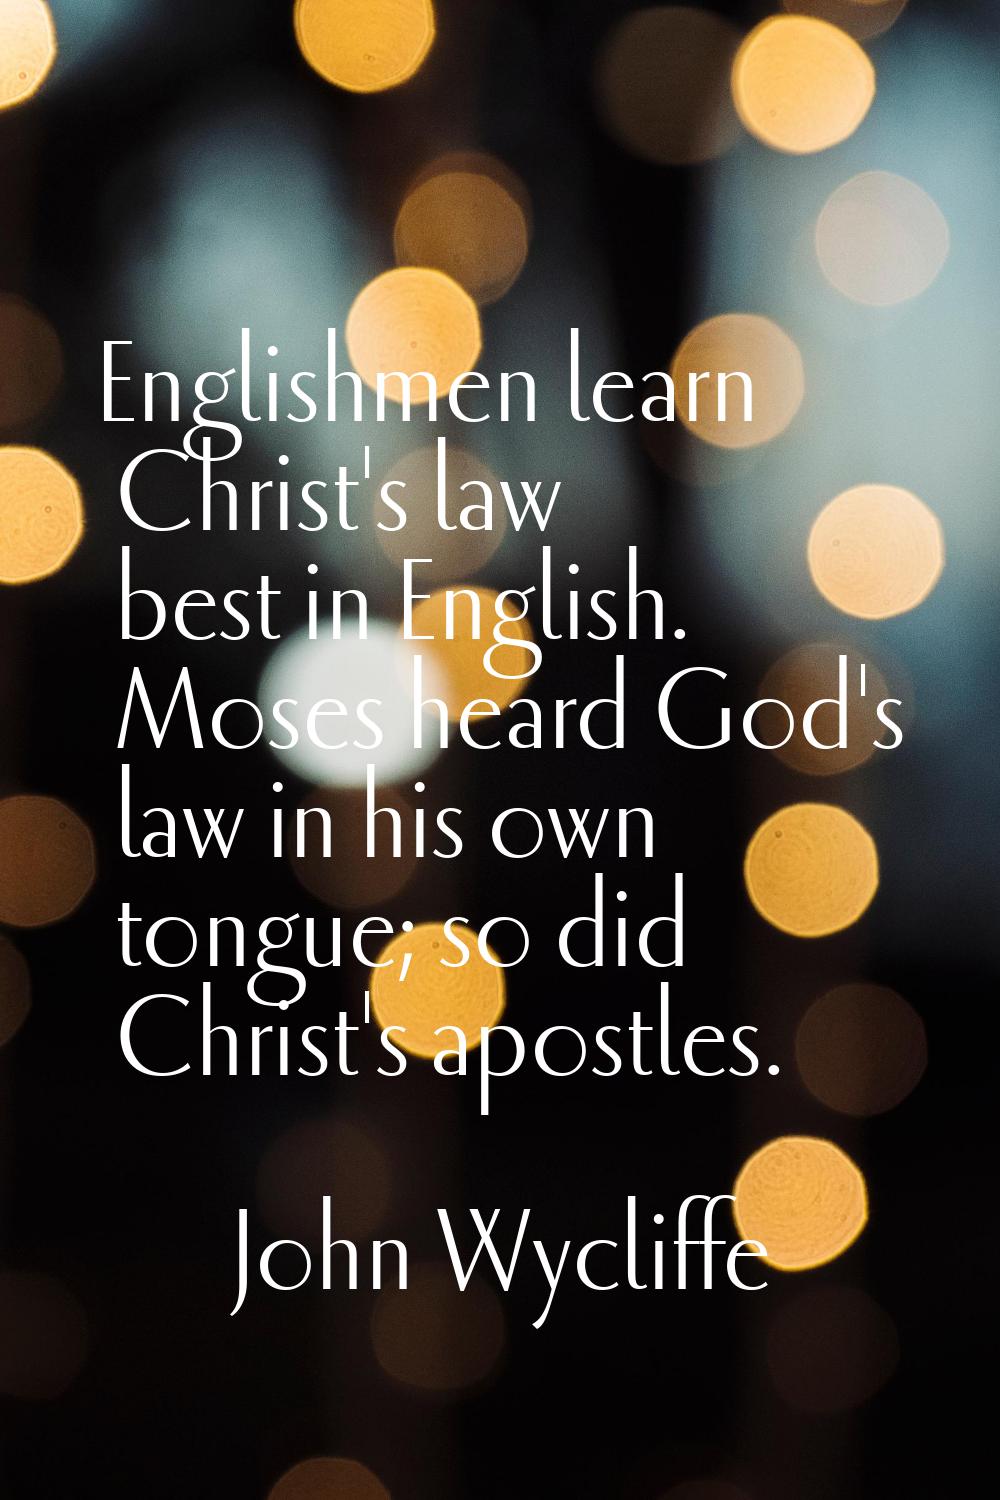 Englishmen learn Christ's law best in English. Moses heard God's law in his own tongue; so did Chri